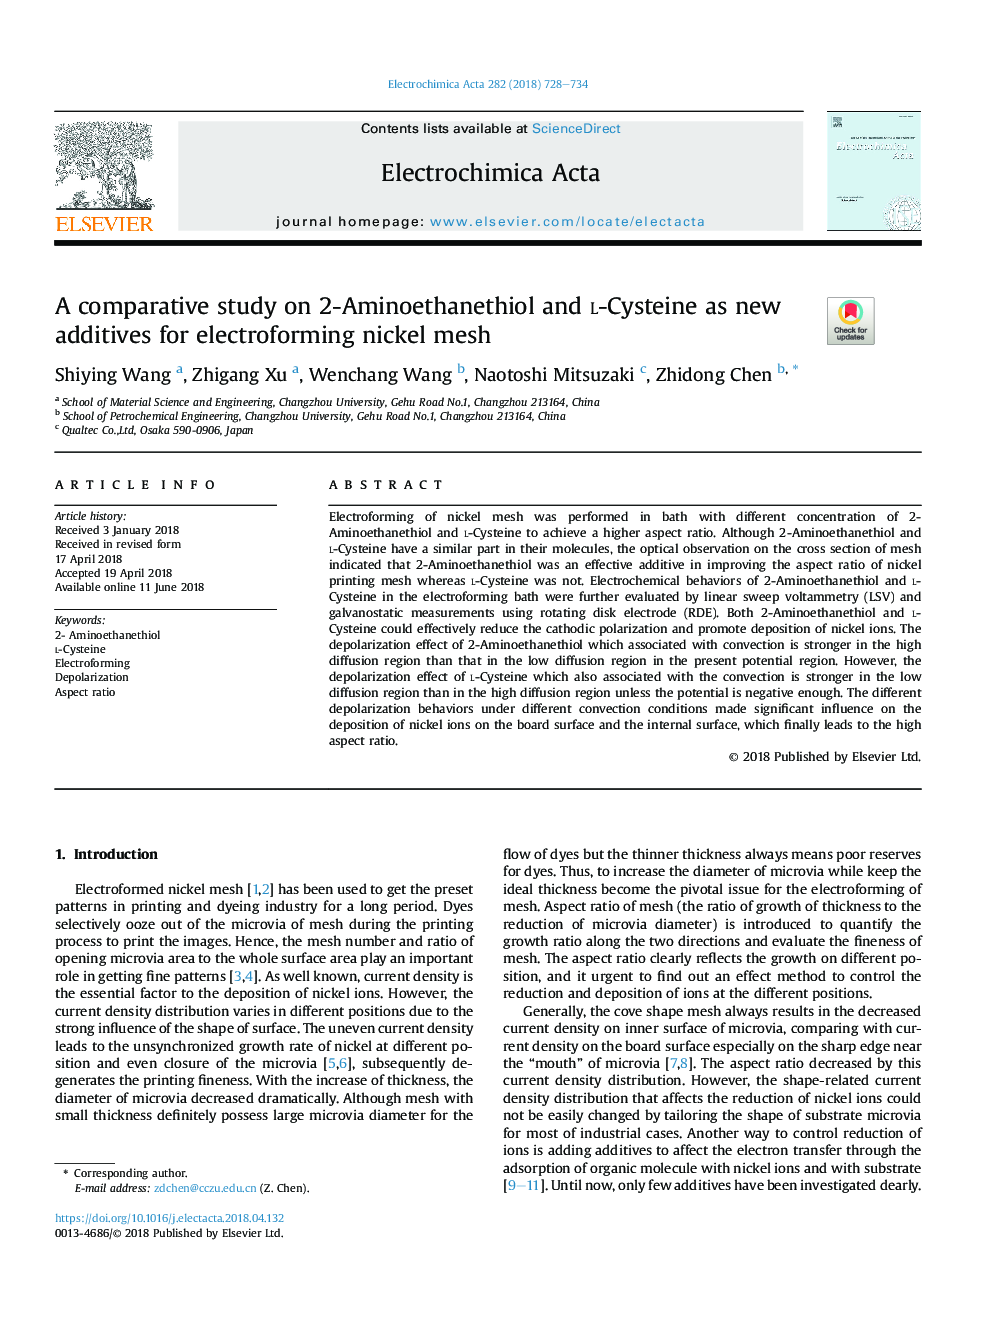 A comparative study on 2-Aminoethanethiol and l-Cysteine as new additives for electroforming nickel mesh